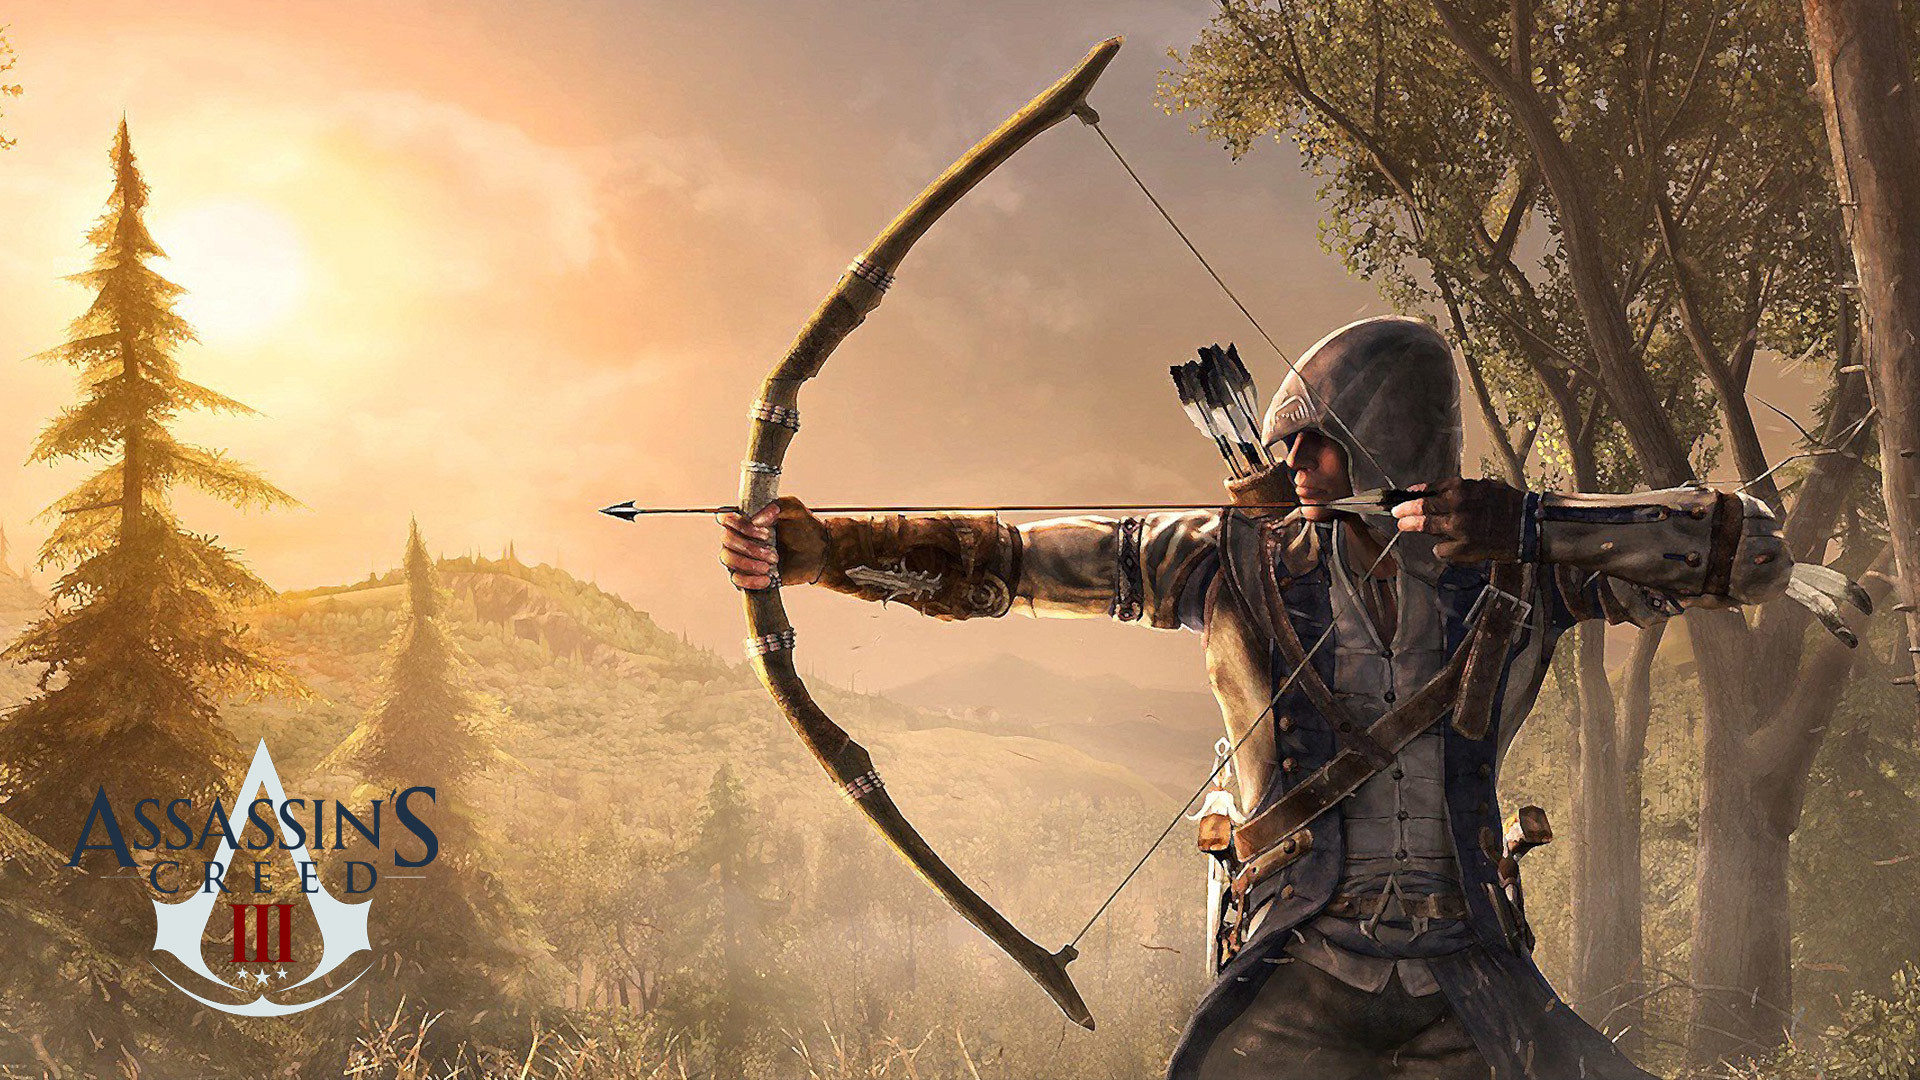 1920x1080 Wallpapers : Assassin's Creed III - Geekeries - Back to the GEEK !